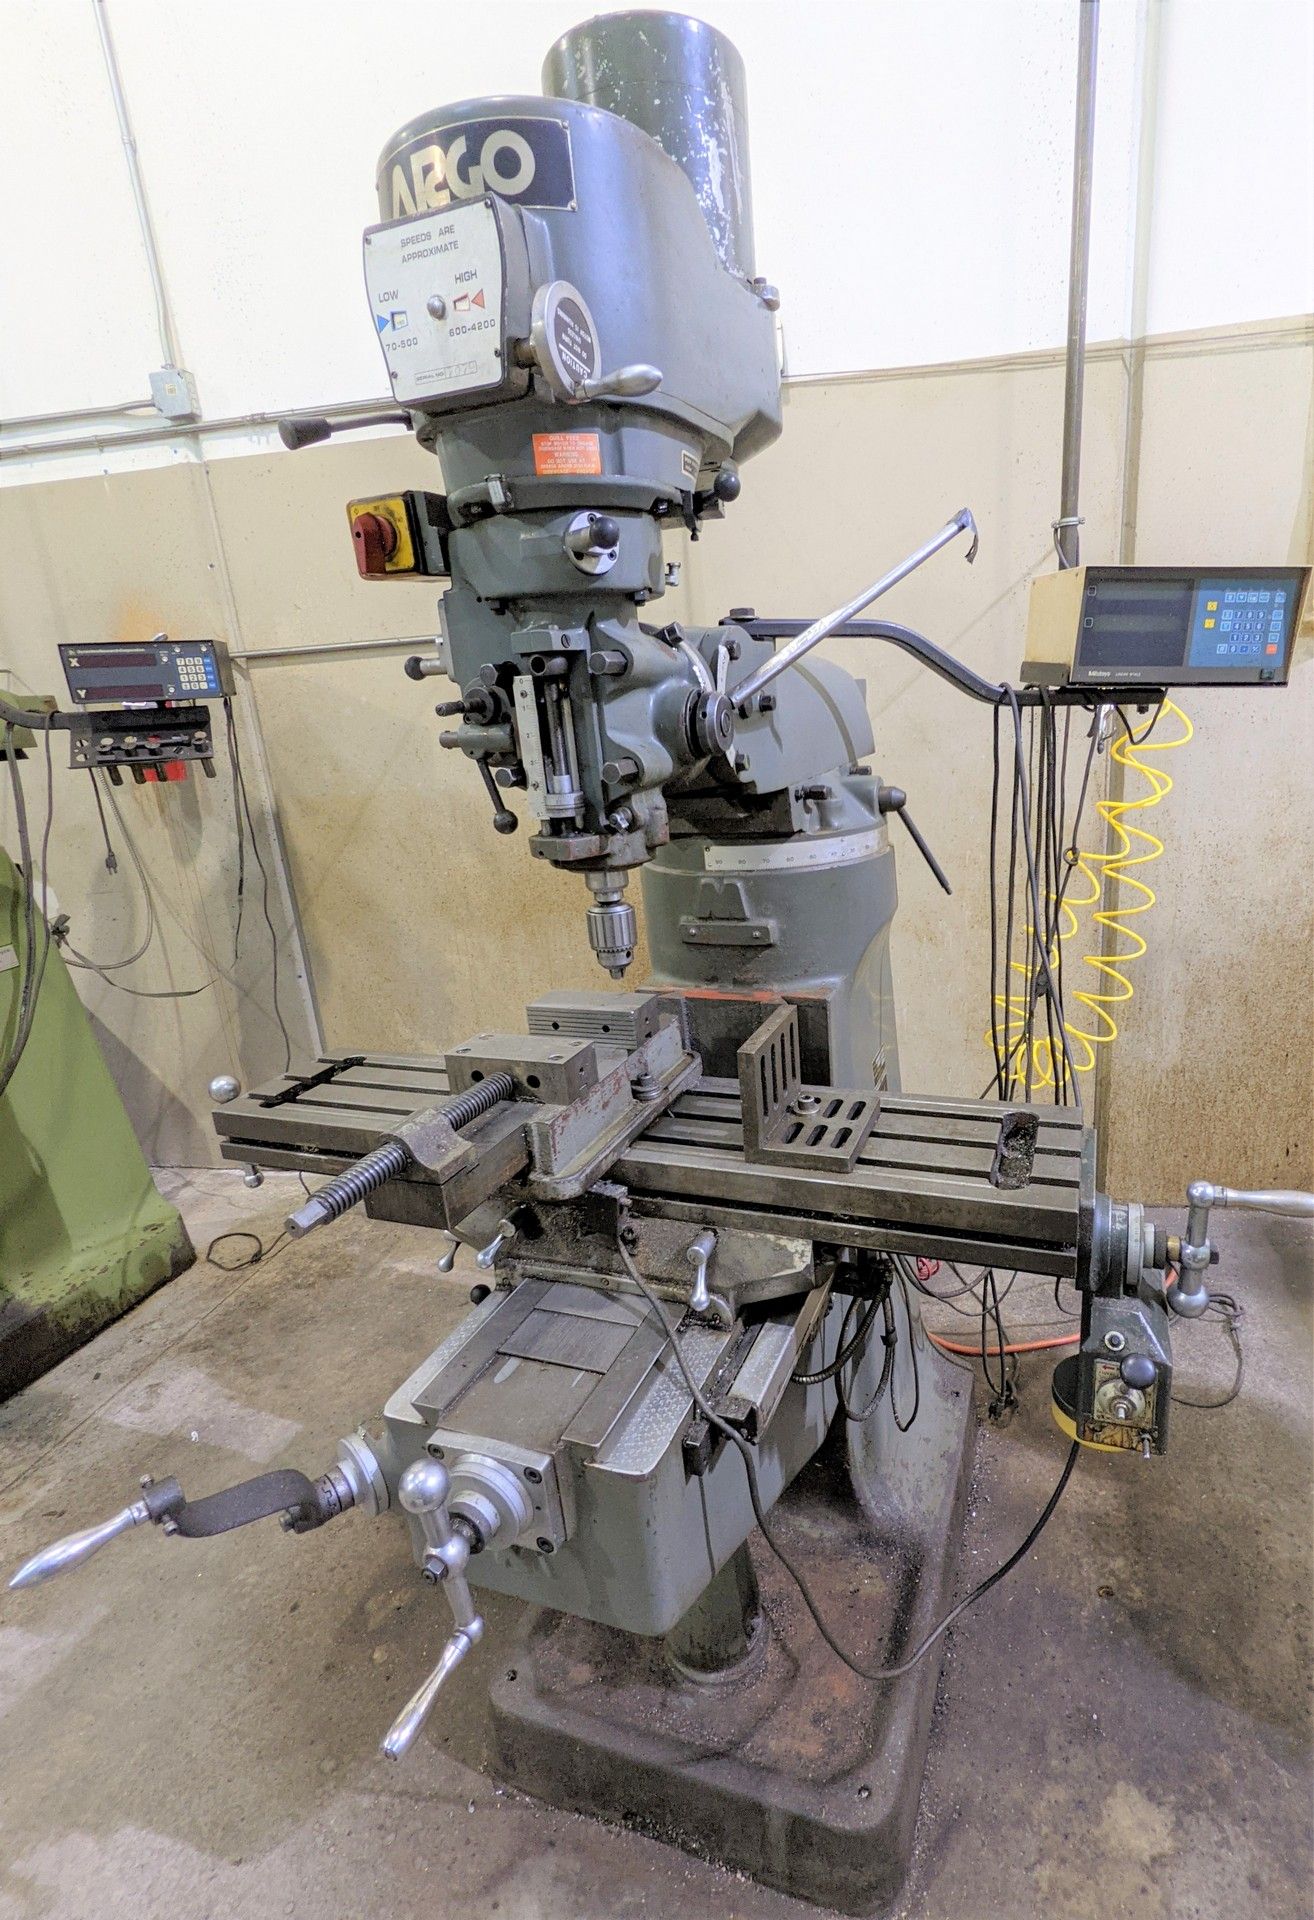 ARGO 942VS VERTICAL MILLING MACHINE, S/N 7079, MITUTOYO 2-AXIS DRO, ALIGN POWER FEED, SPEEDS TO 4, - Image 3 of 12